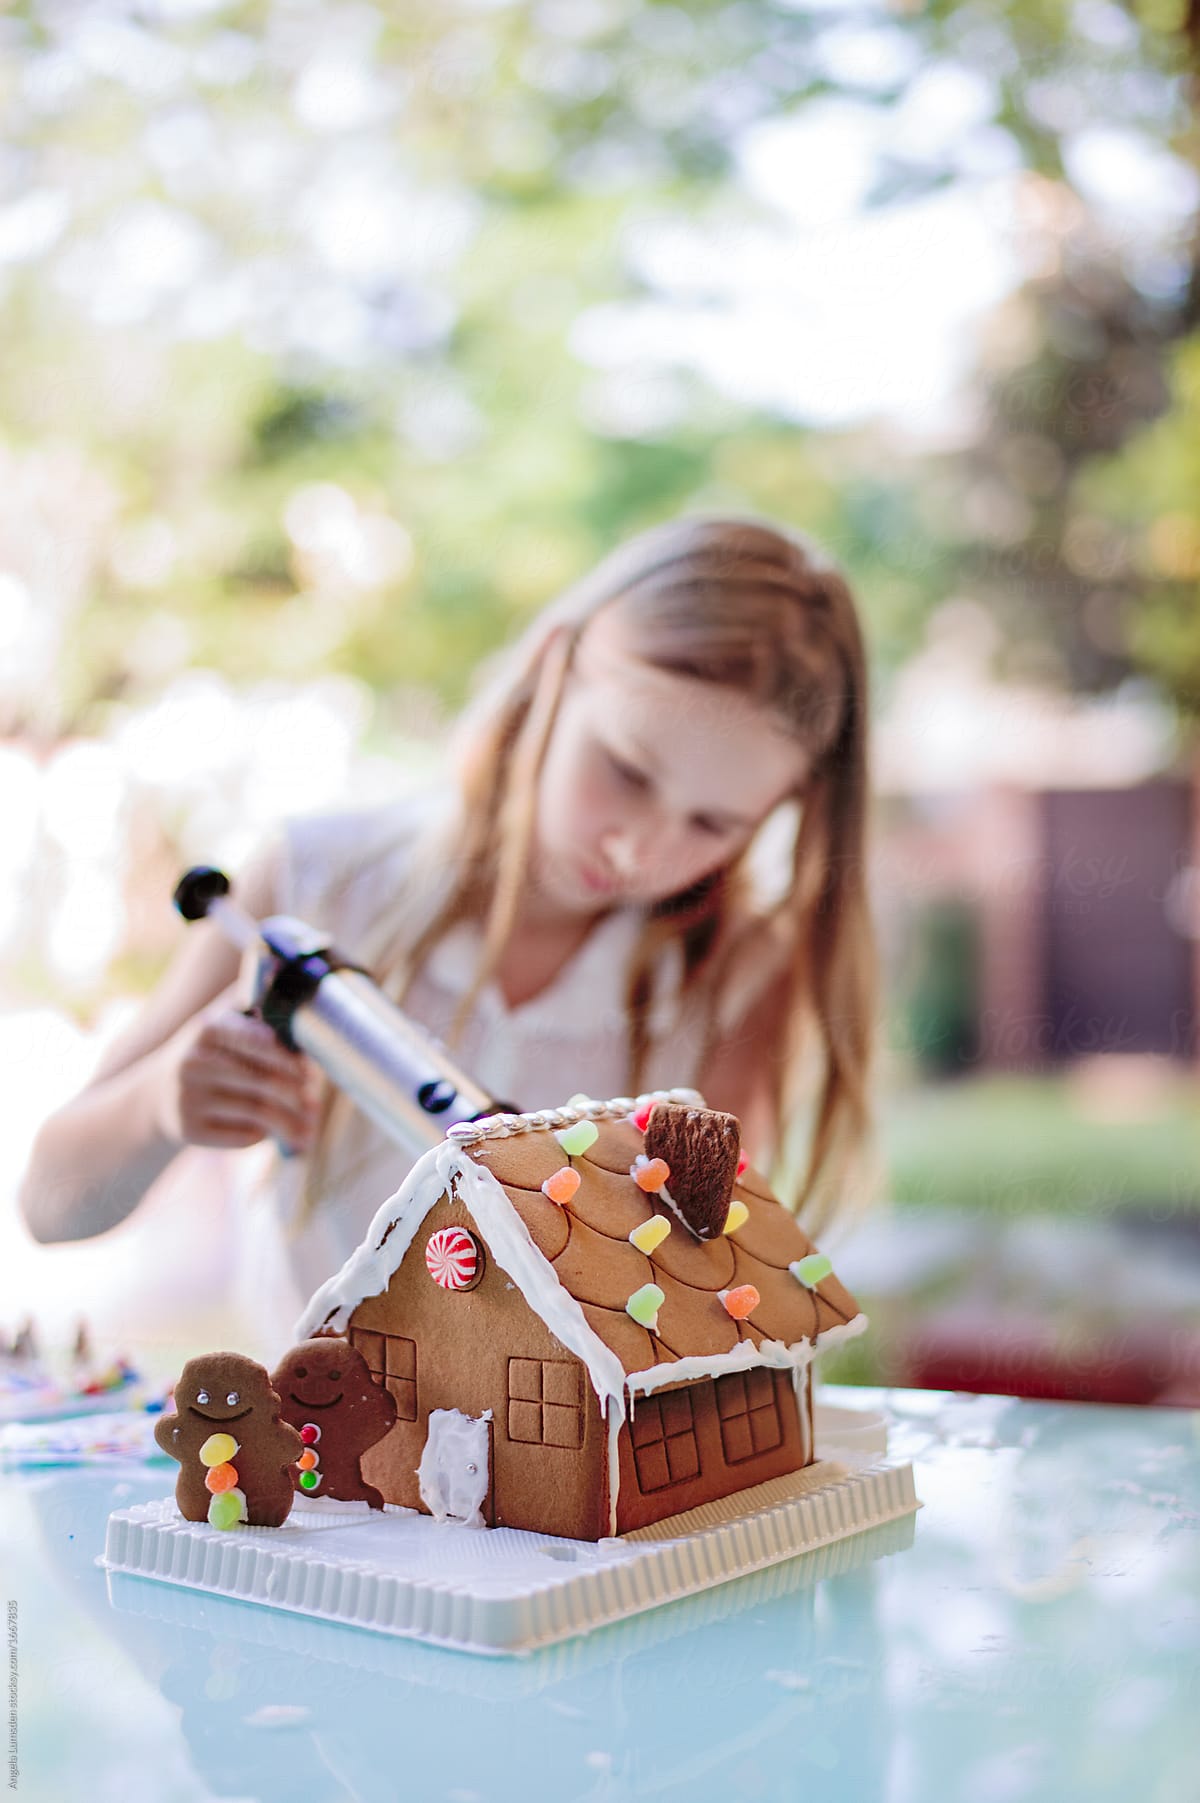 Girl Icing A Gingerbread House At Christmas By Angela Lumsden Stocksy